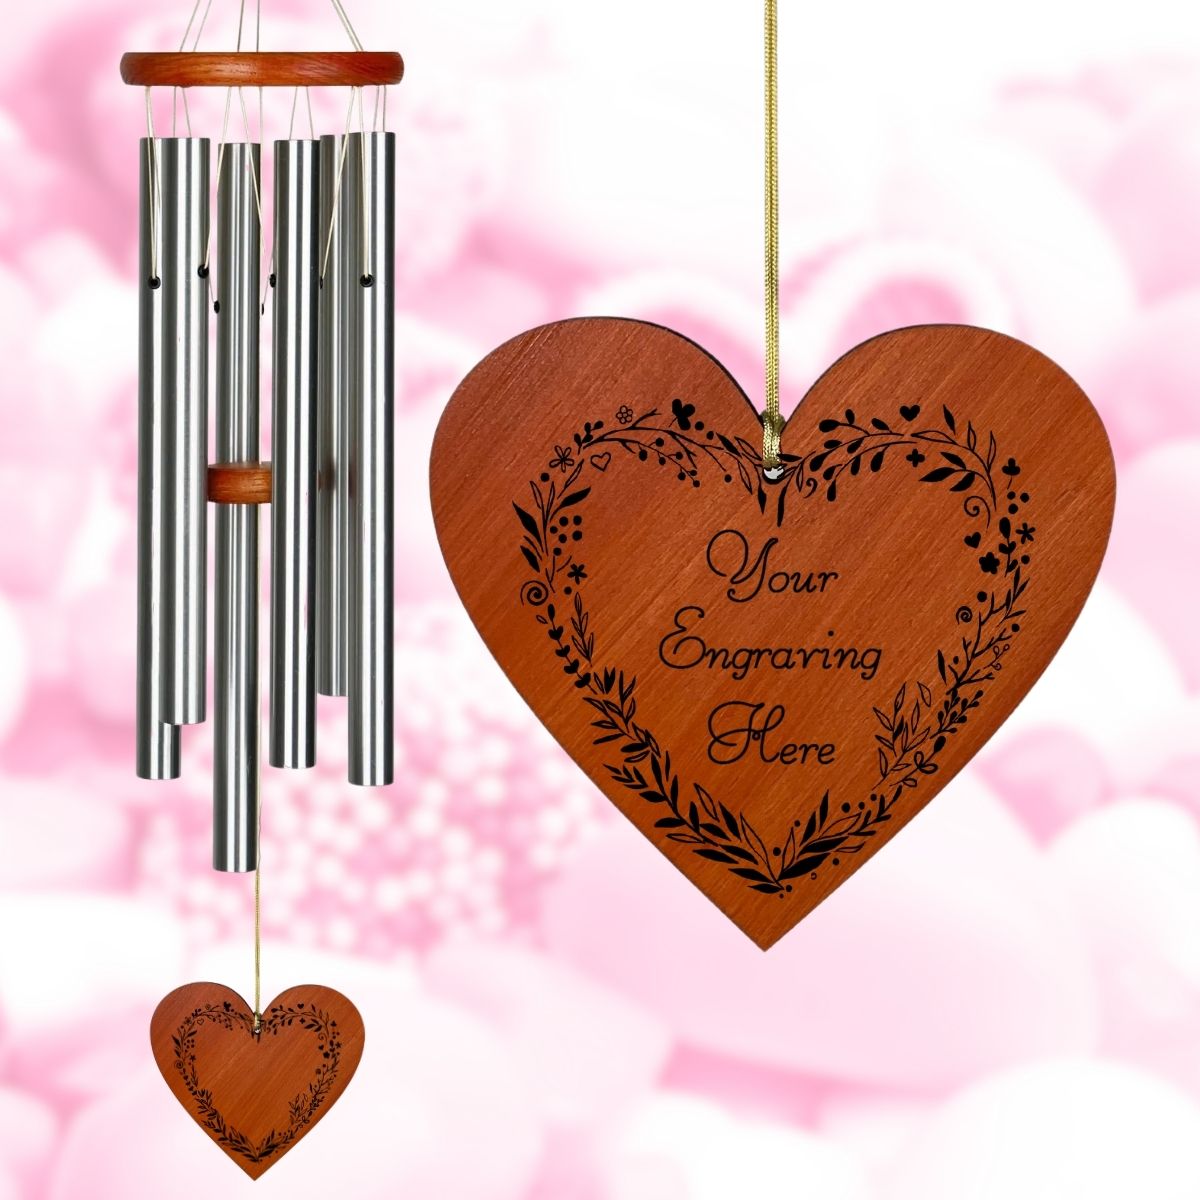 Amazing Grace 25 Inch Silver Wind Chime - Engravable Floral Wreath Heart Sail